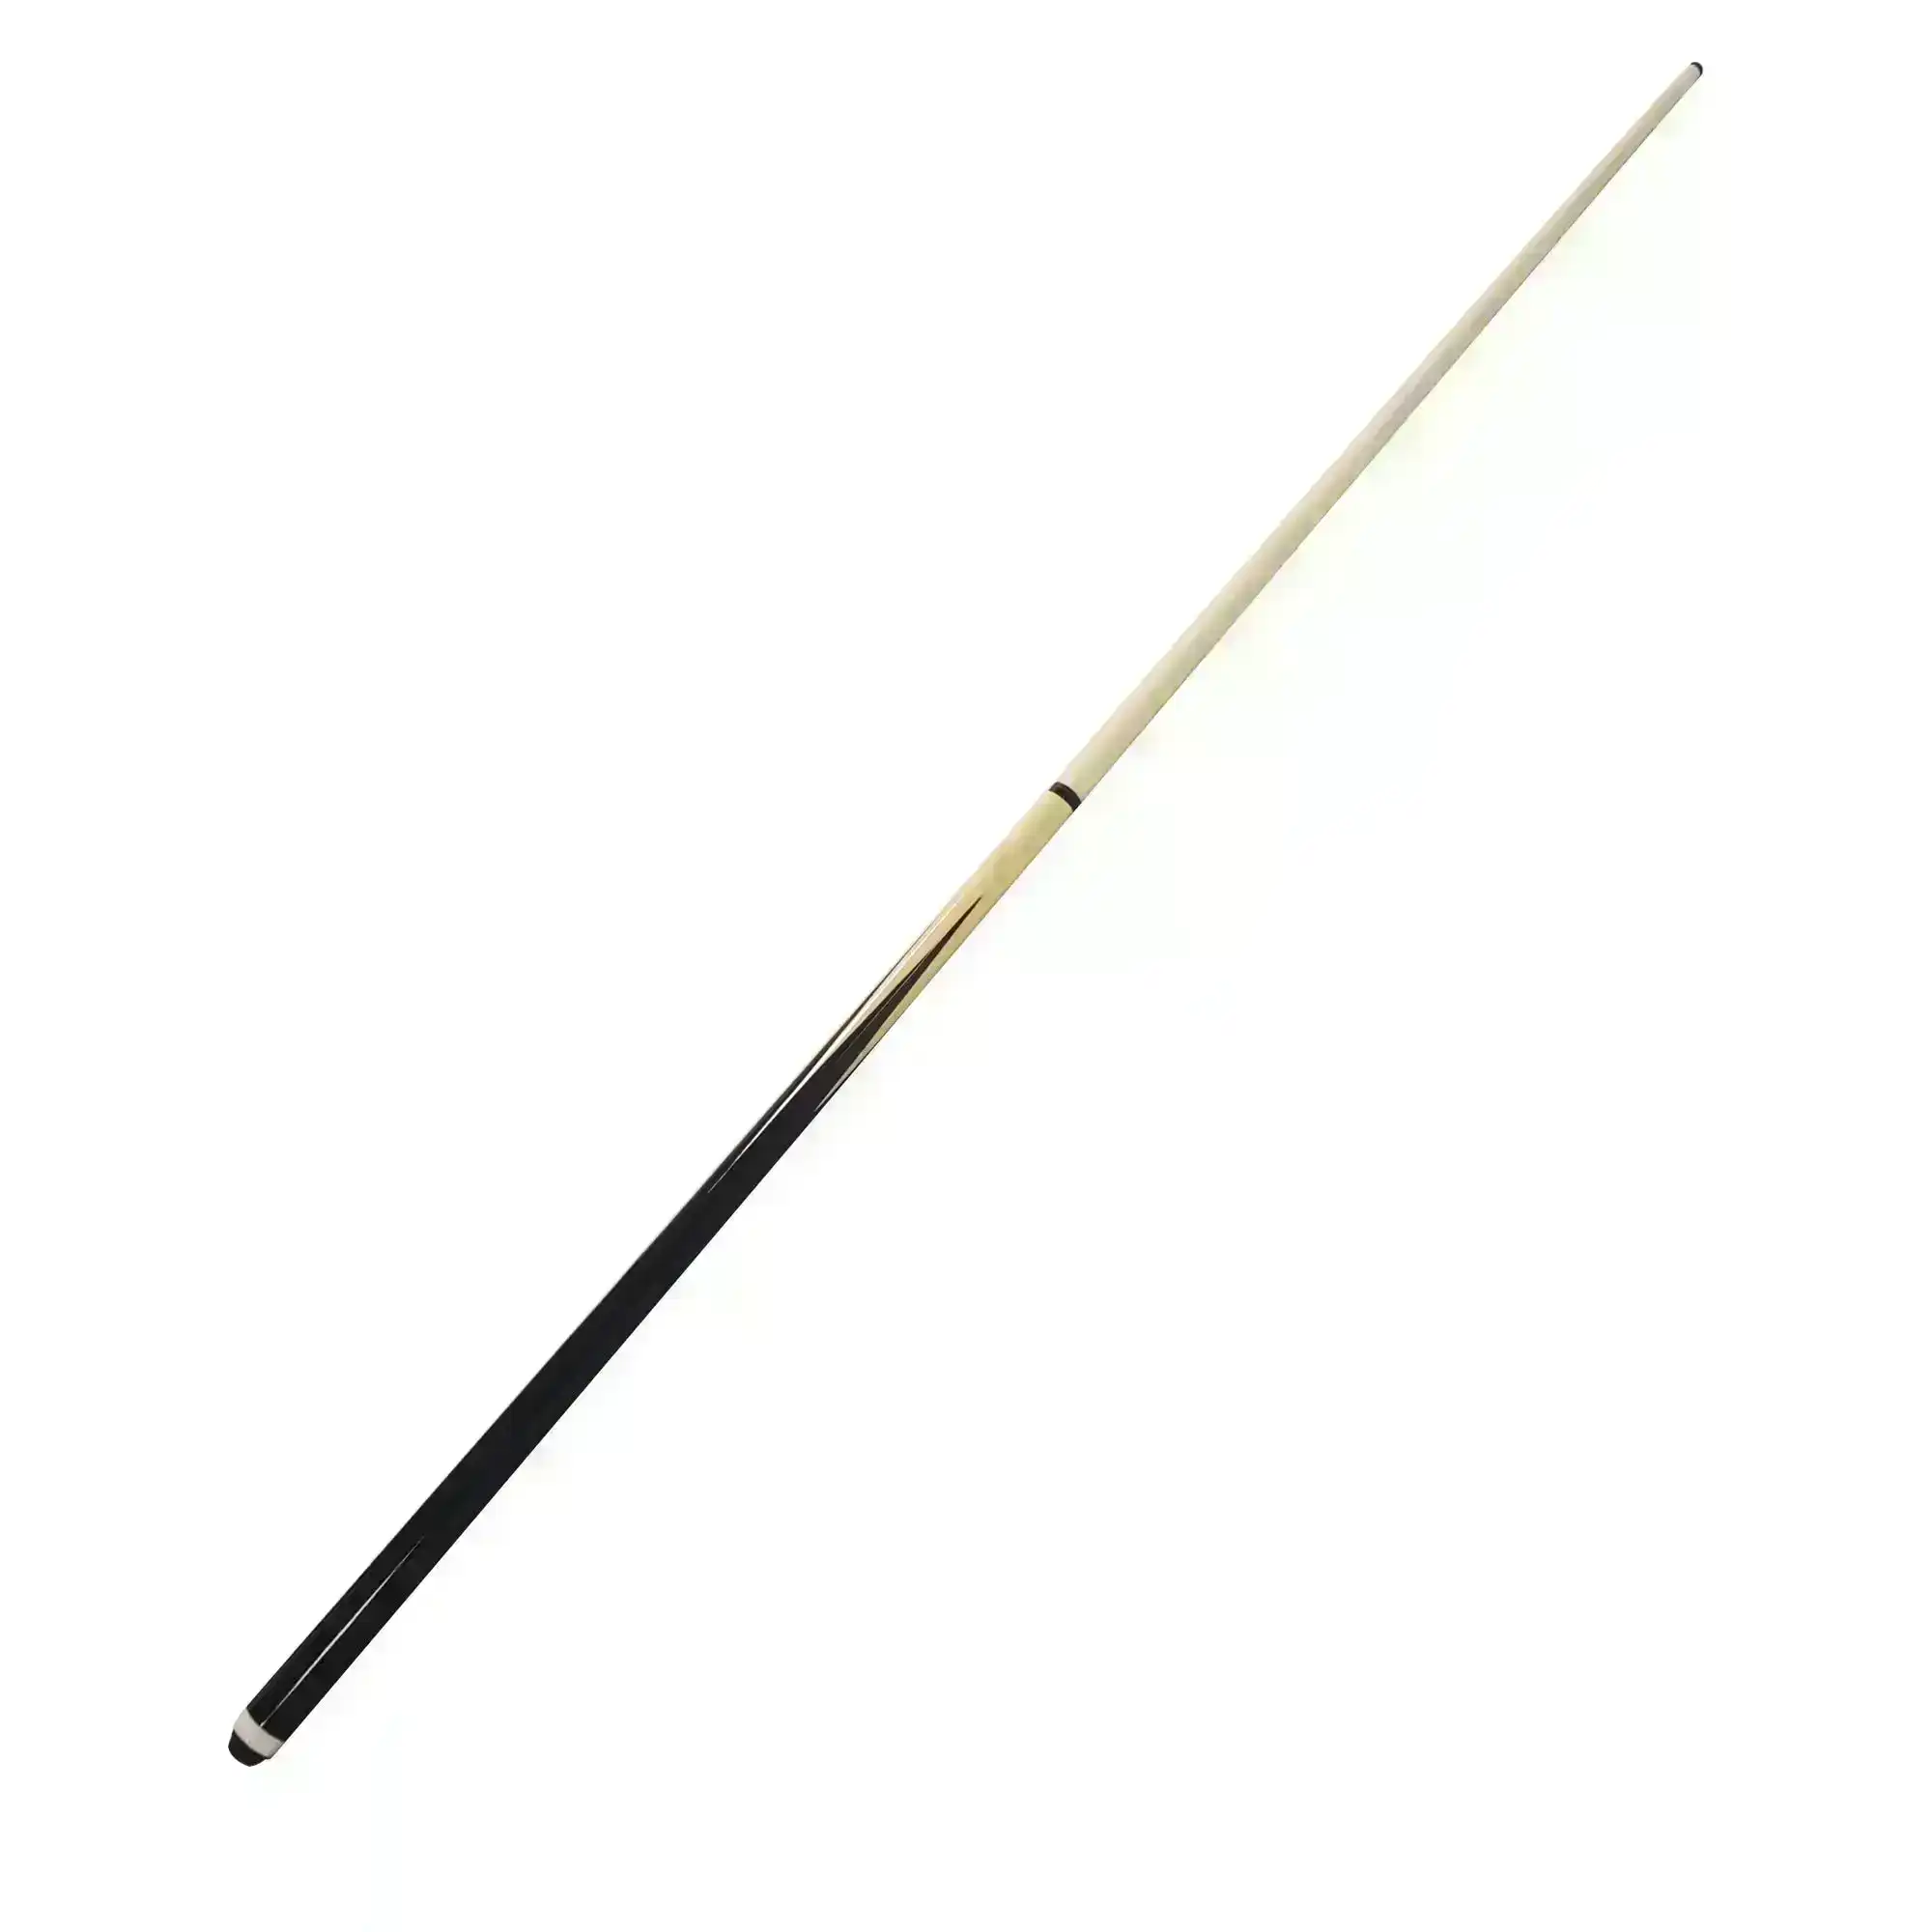 MACE 48 Inches 2-Piece Short Cue for Pool Billiards Snooker